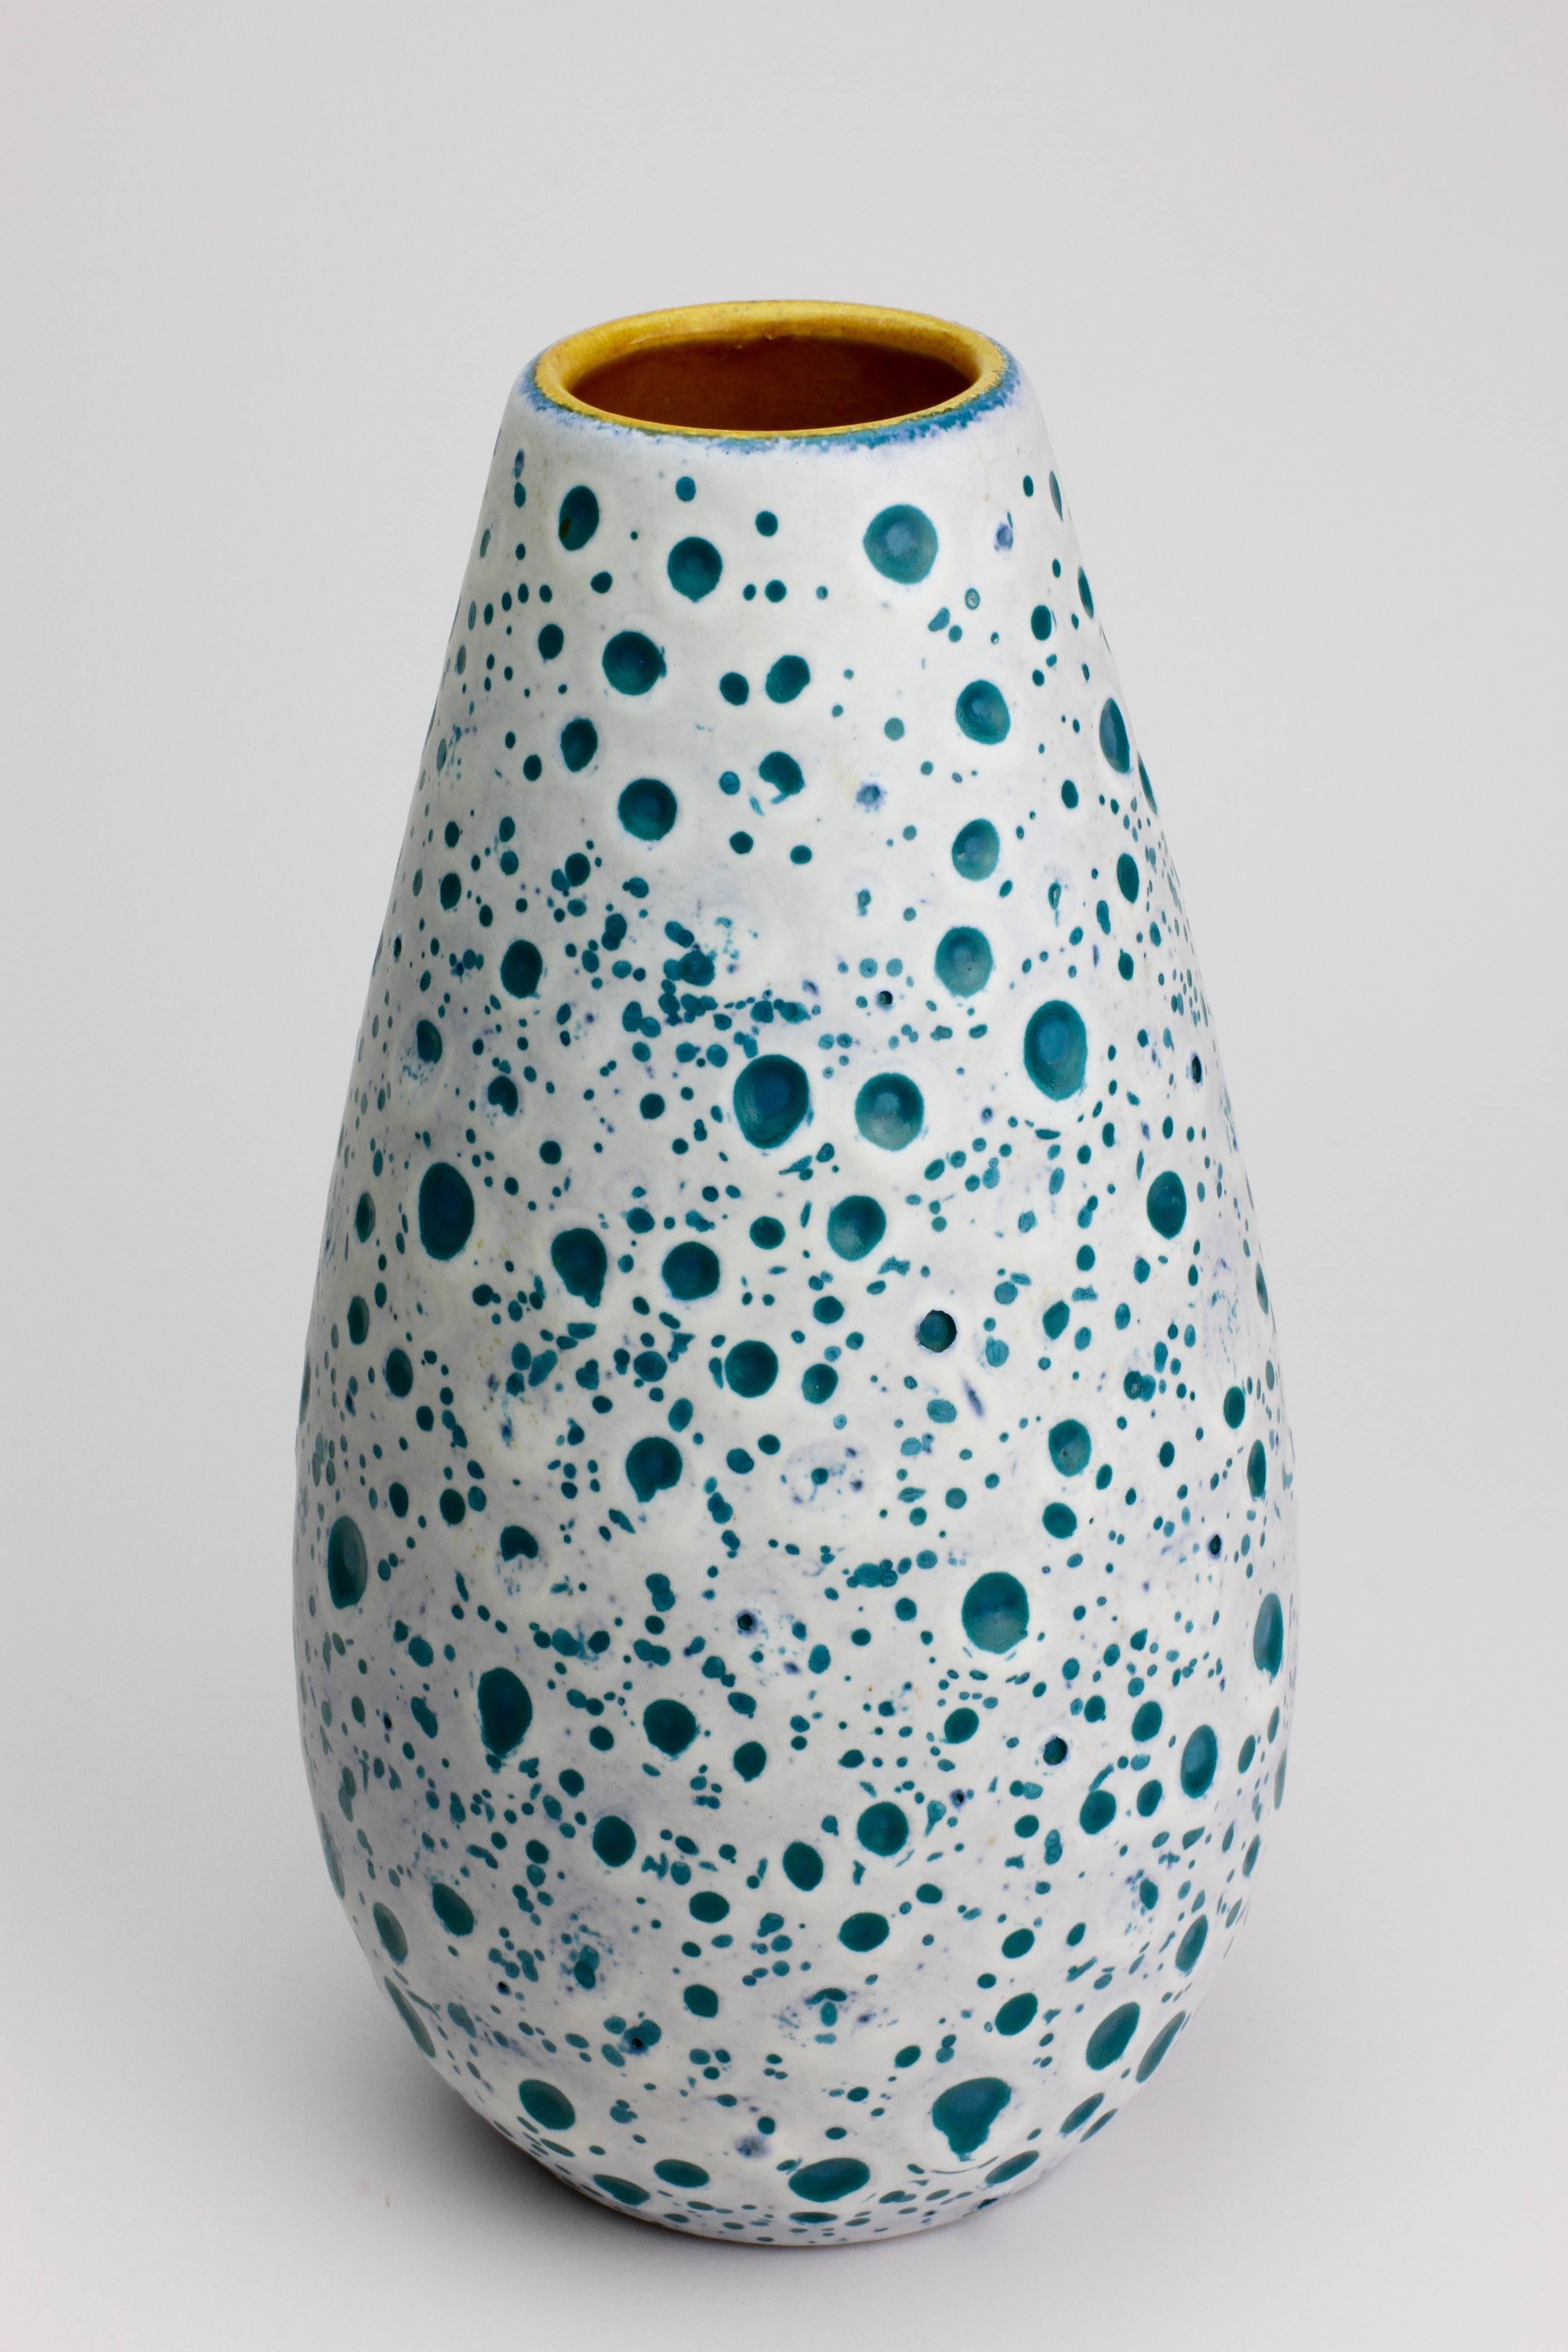 Beautiful Mid-Century example of West German pottery by Ü-Keramik, circa 1960. Featuring a stunning color combination of white over turquoise with a yellow inner glaze, the outer glaze resembles the surface of the moon with craters exposing the